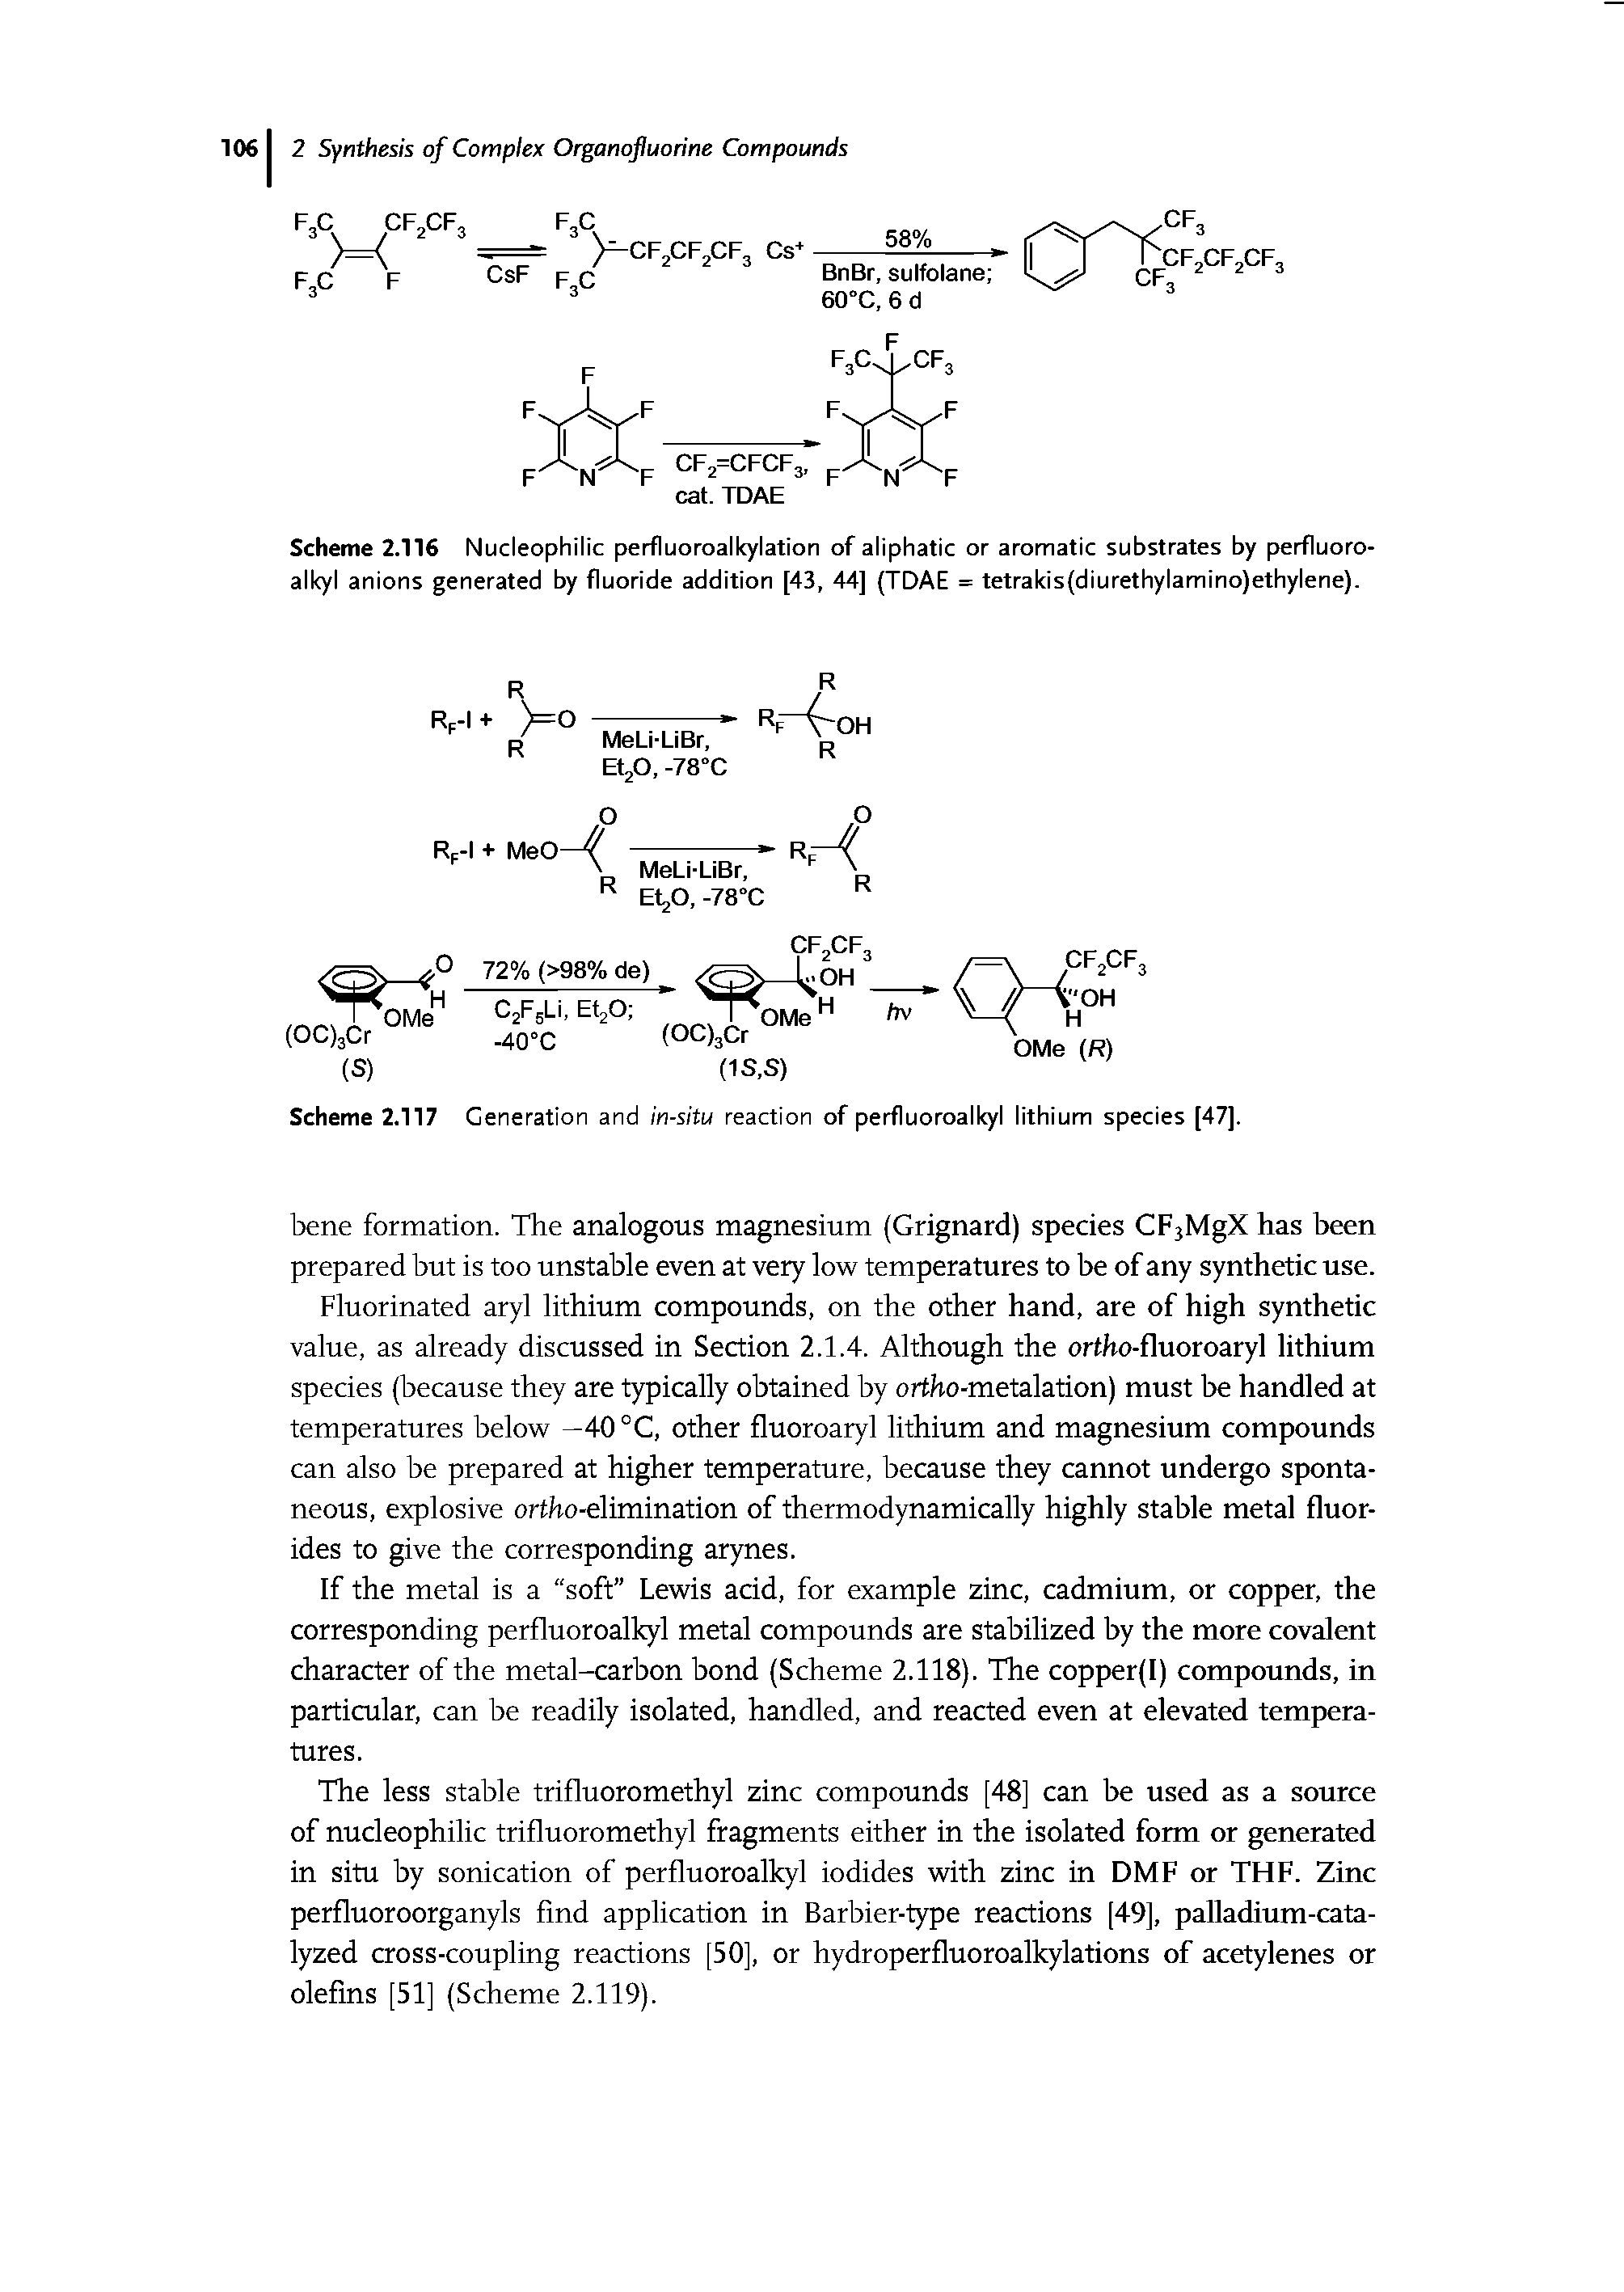 Scheme 2.116 Nucleophilic perfluoroalkylation of aliphatic or aromatic substrates by perfluoroalkyl anions generated by fluoride addition [43, 44] (TDAE = tetrakis(diurethylamino)ethylene).